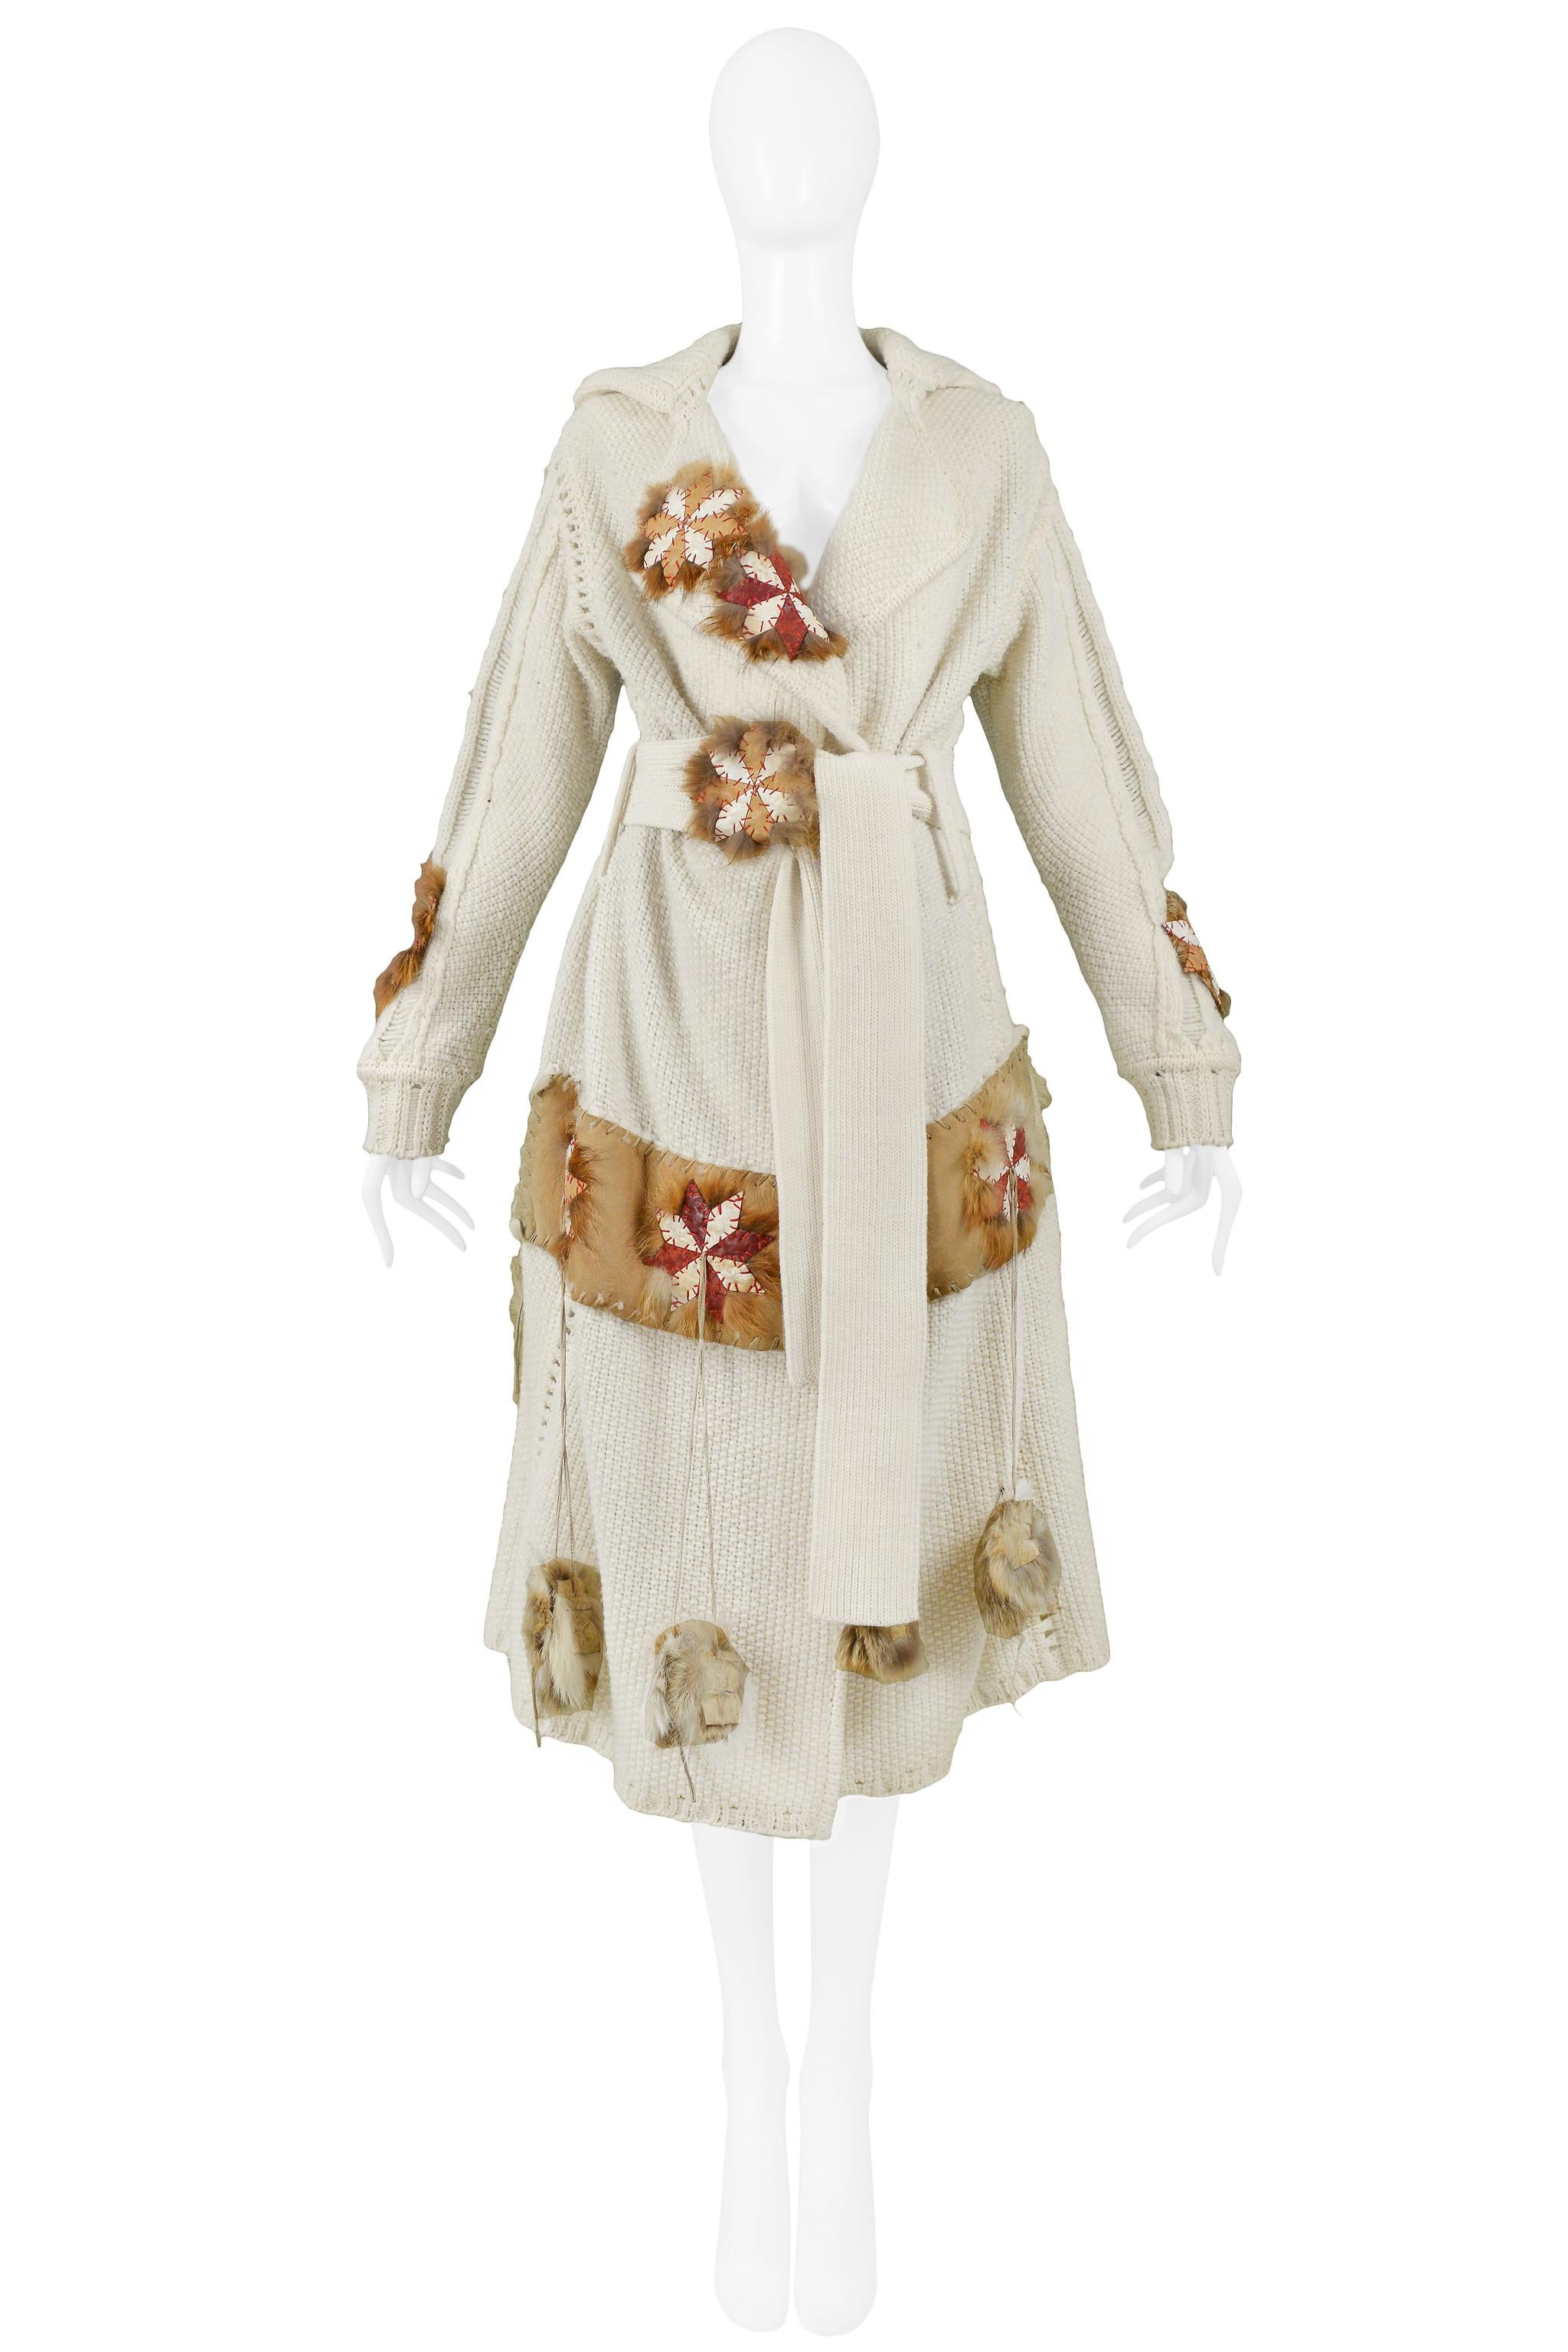 Resurrection Vintage is excited to offer a luxurious vintage John Galliano off-white long sweater coat featuring leather patchwork appliques that spell Galliano, leather trim, pinwheel appliques, red stitching, fur trim, and a matching belt. 

John